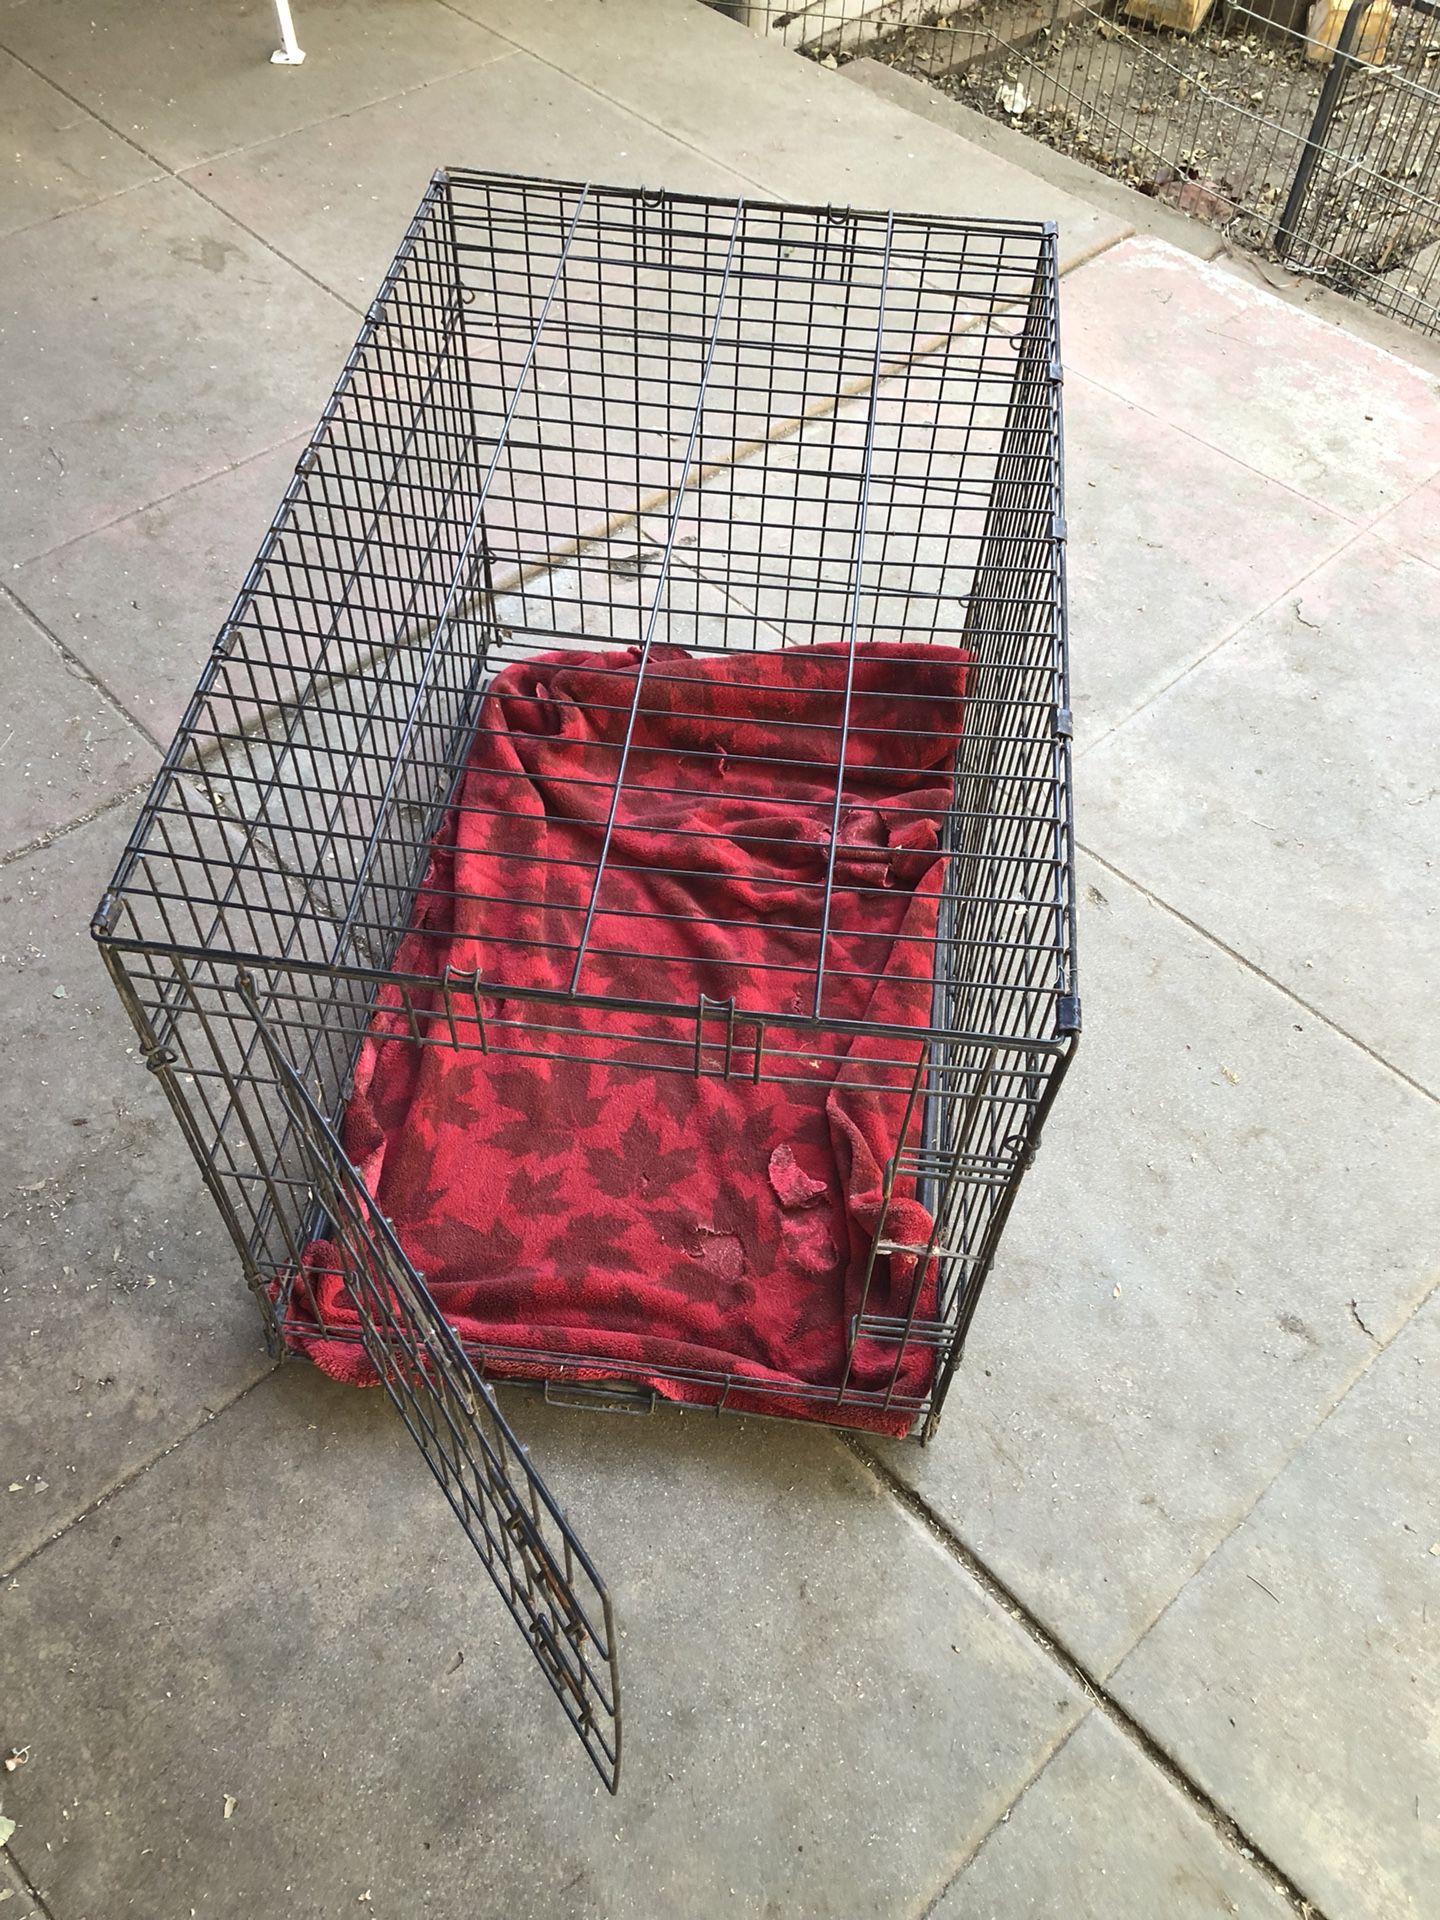 PetCo 36” dog crate. Foldable, collapsible.